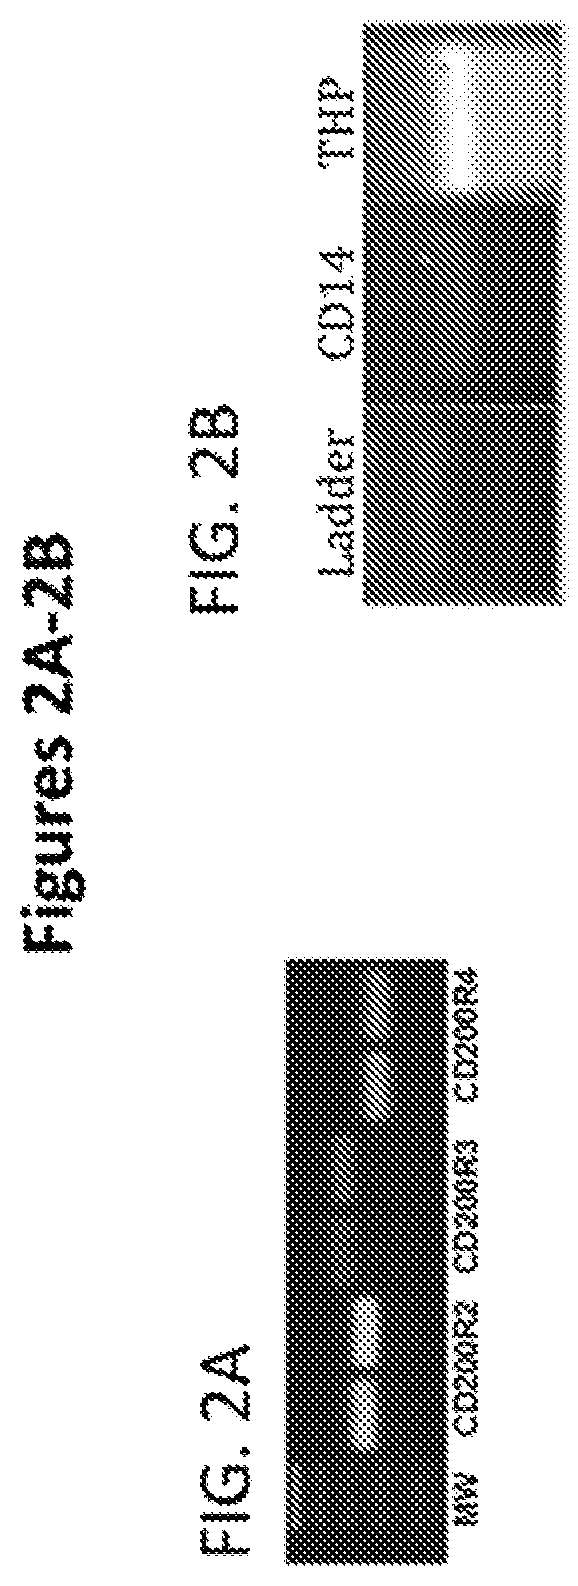 CD200 inhibitors and methods of use thereof